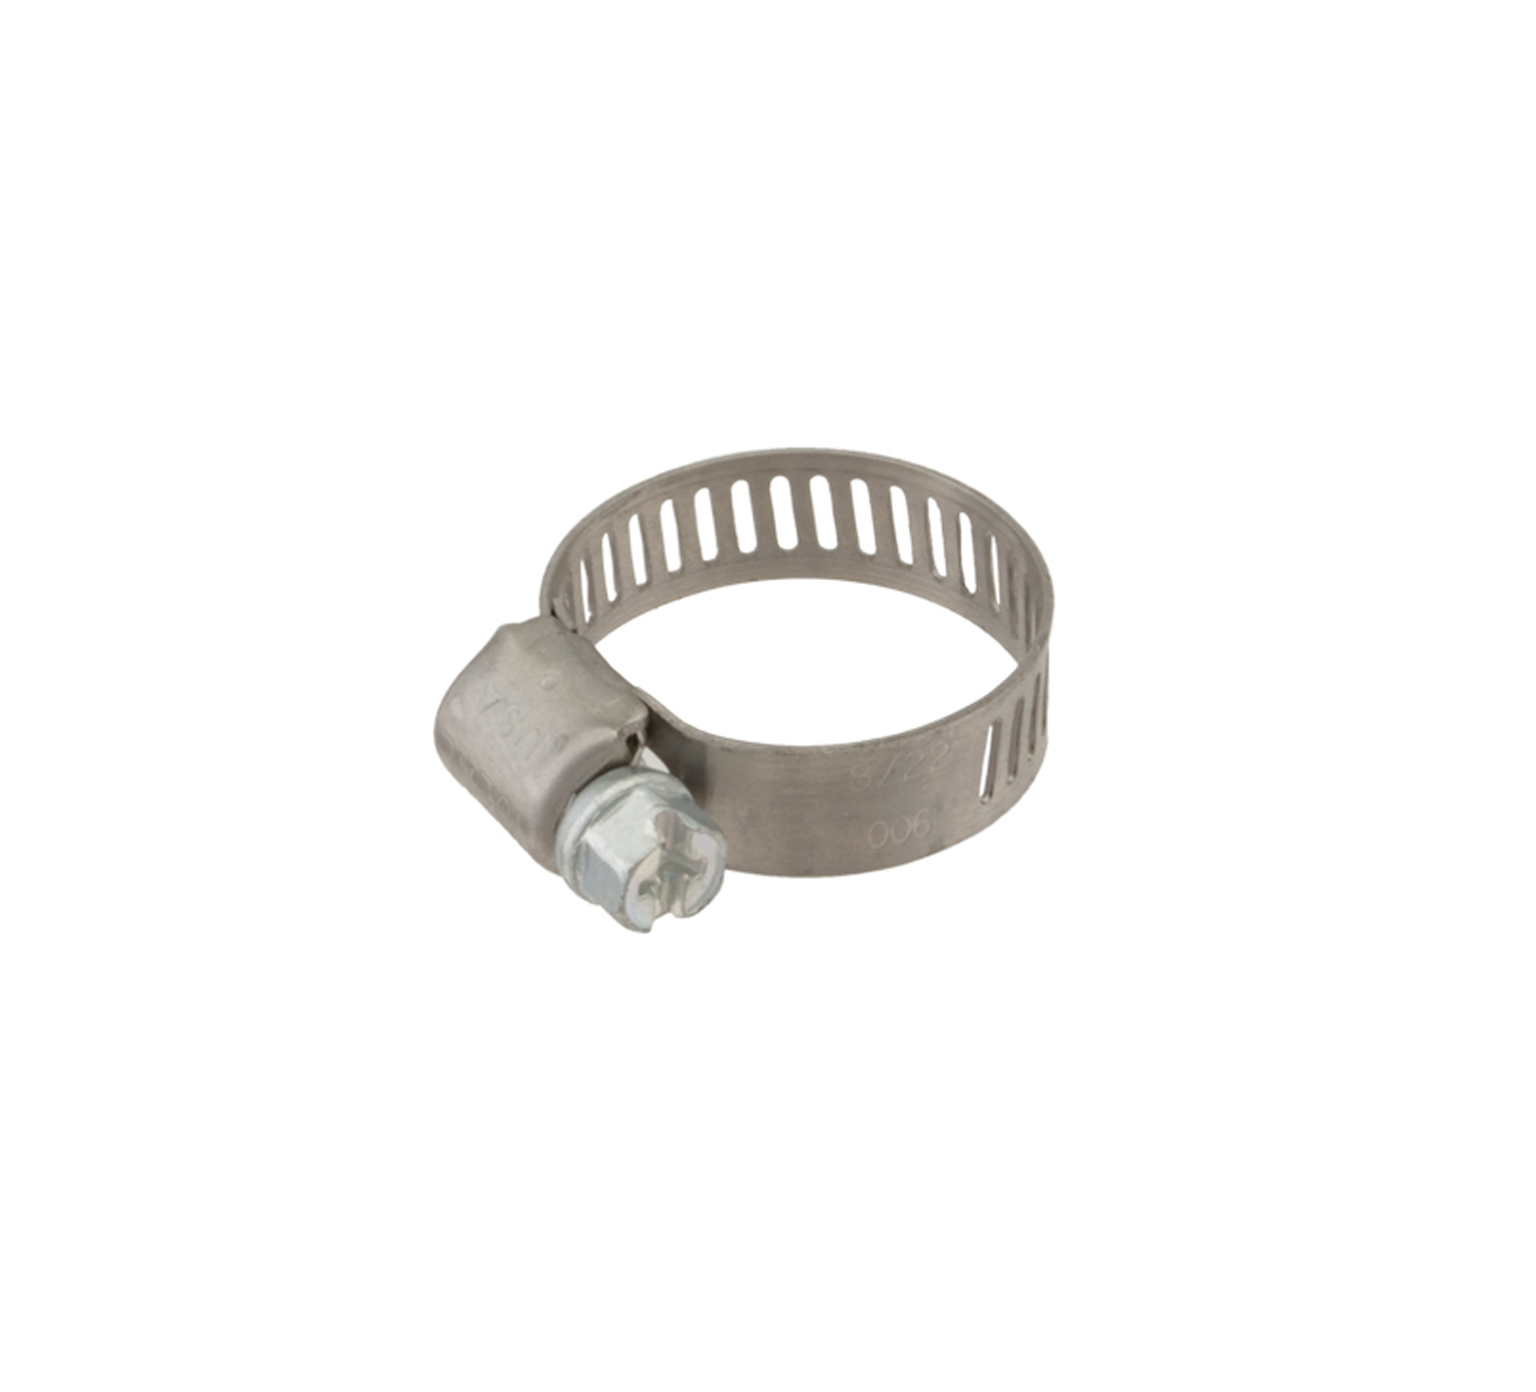 54333 Stainless Steel Hose Clamp - 0.31 - 0.88 in x 0.31 in alt 1